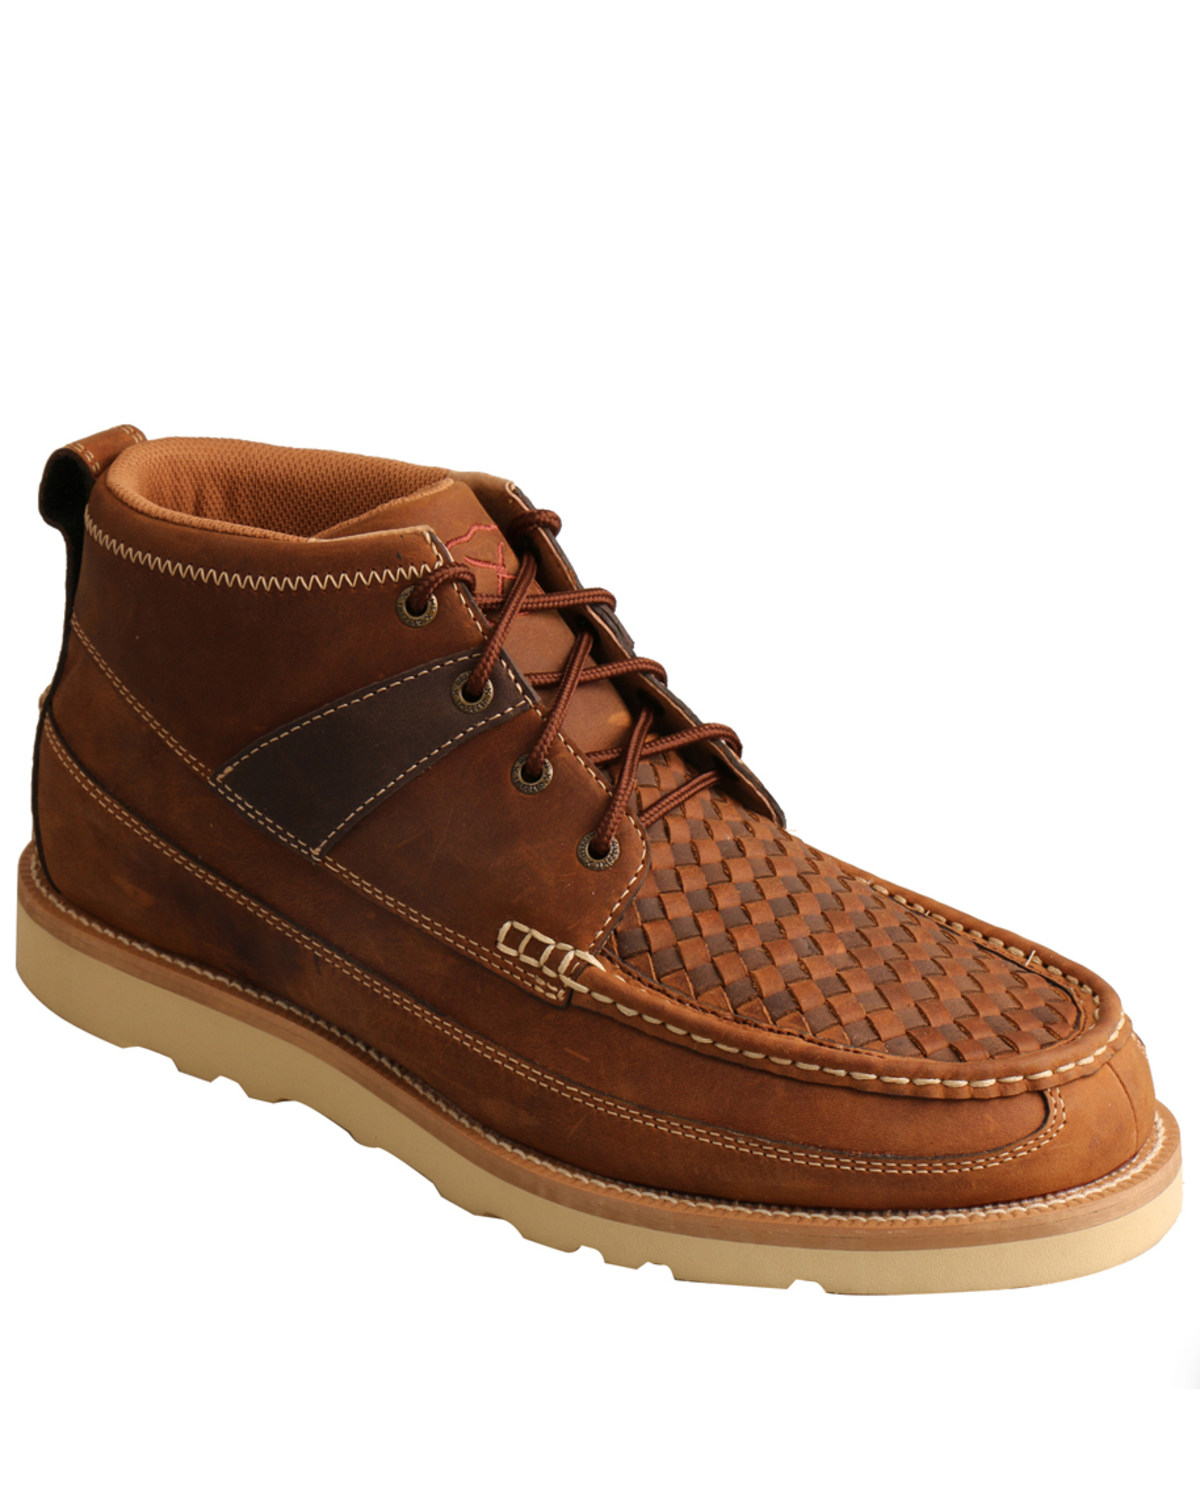 Twisted X Men's Casual Lace-Up Boots - Moc Toe